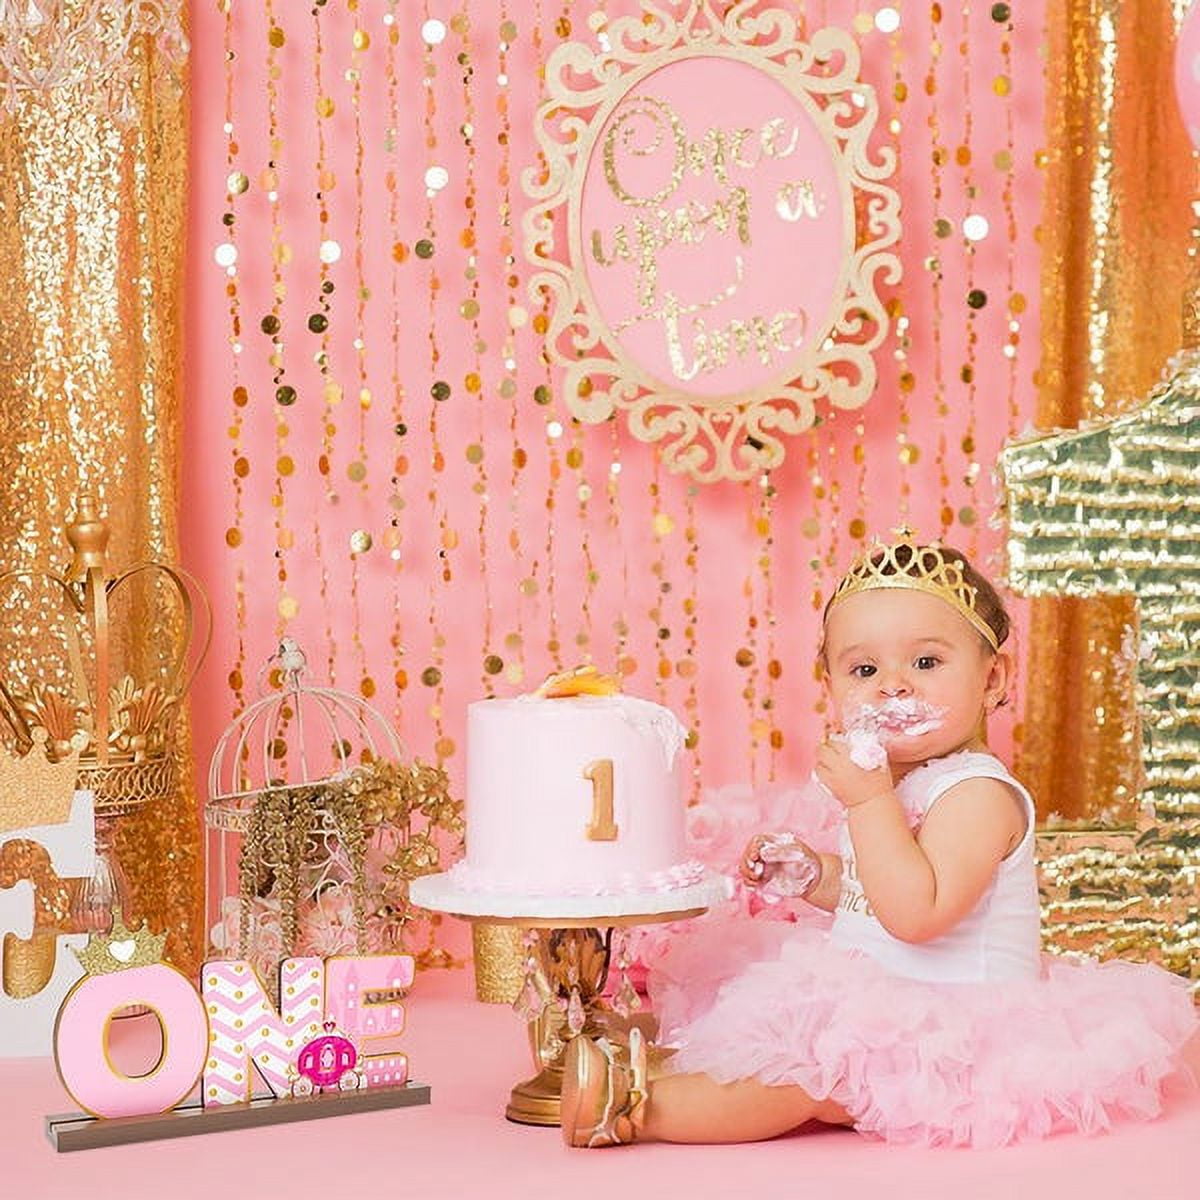 4Free shippingGold glitter ONE sign Baby birthday centerpiece Wooden  cutout word ONE First Birthday Party Decor